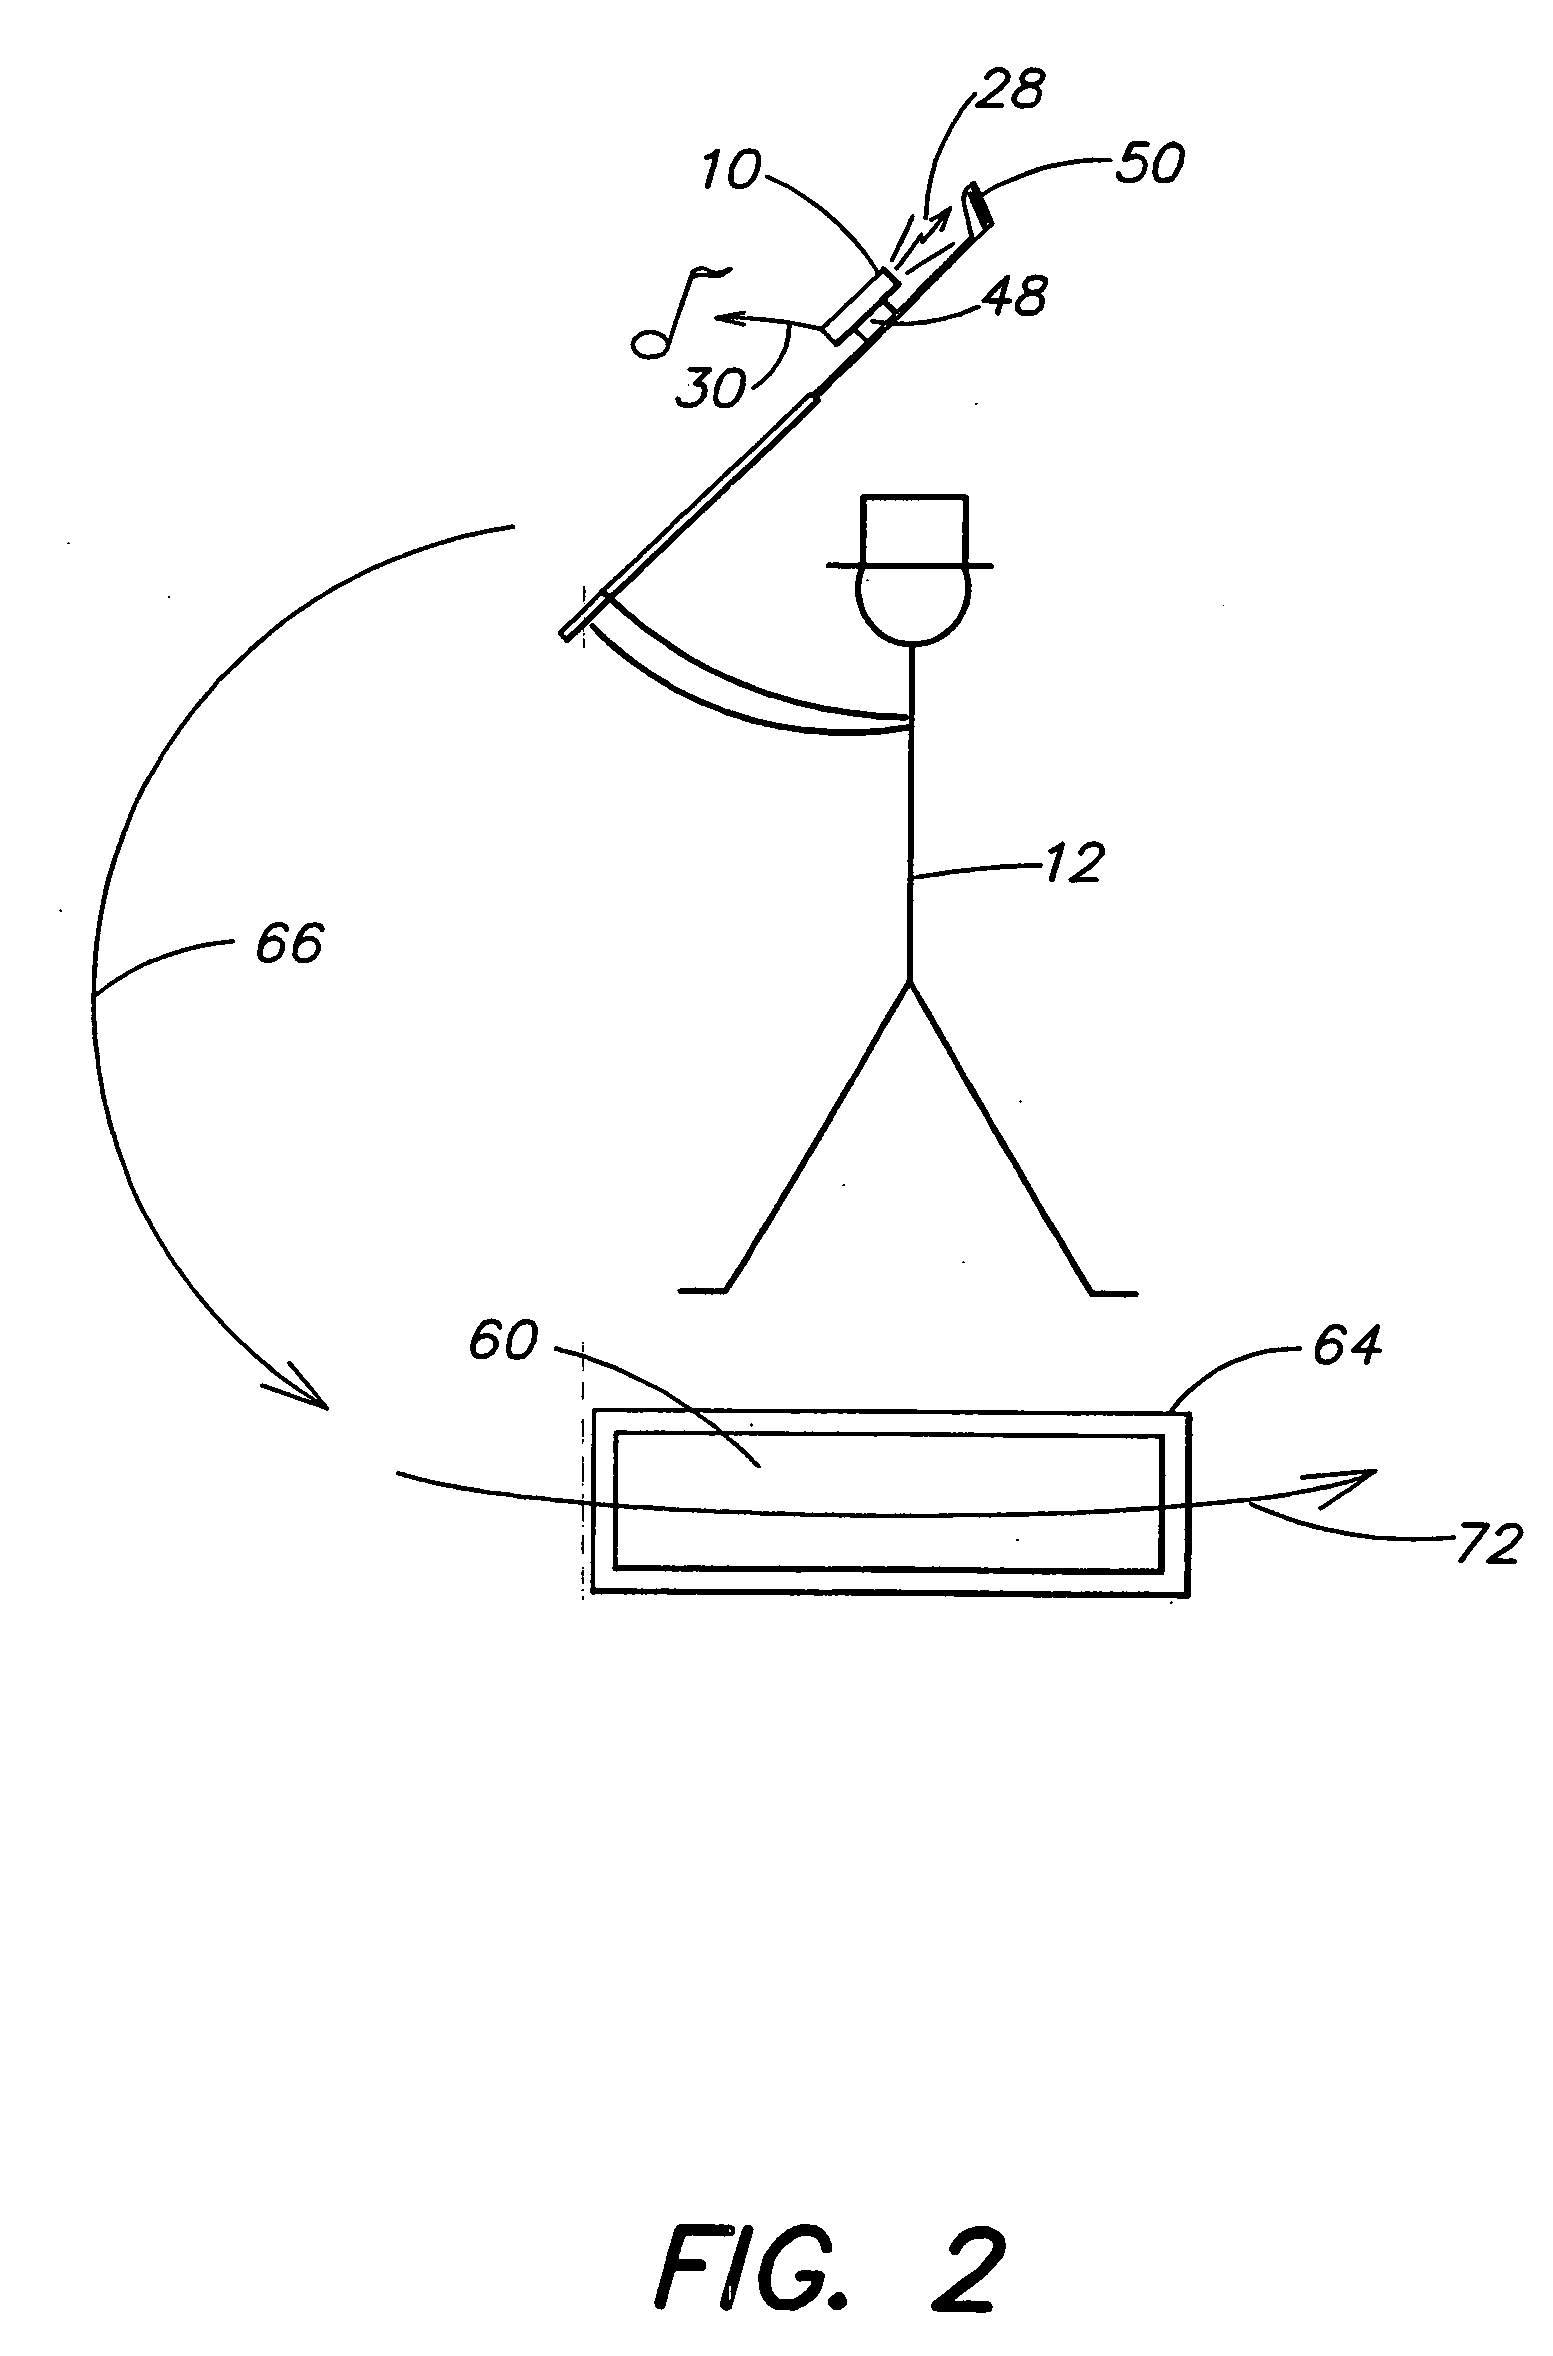 Methods and apparatus for providing feedback to a subject in connection with performing a task